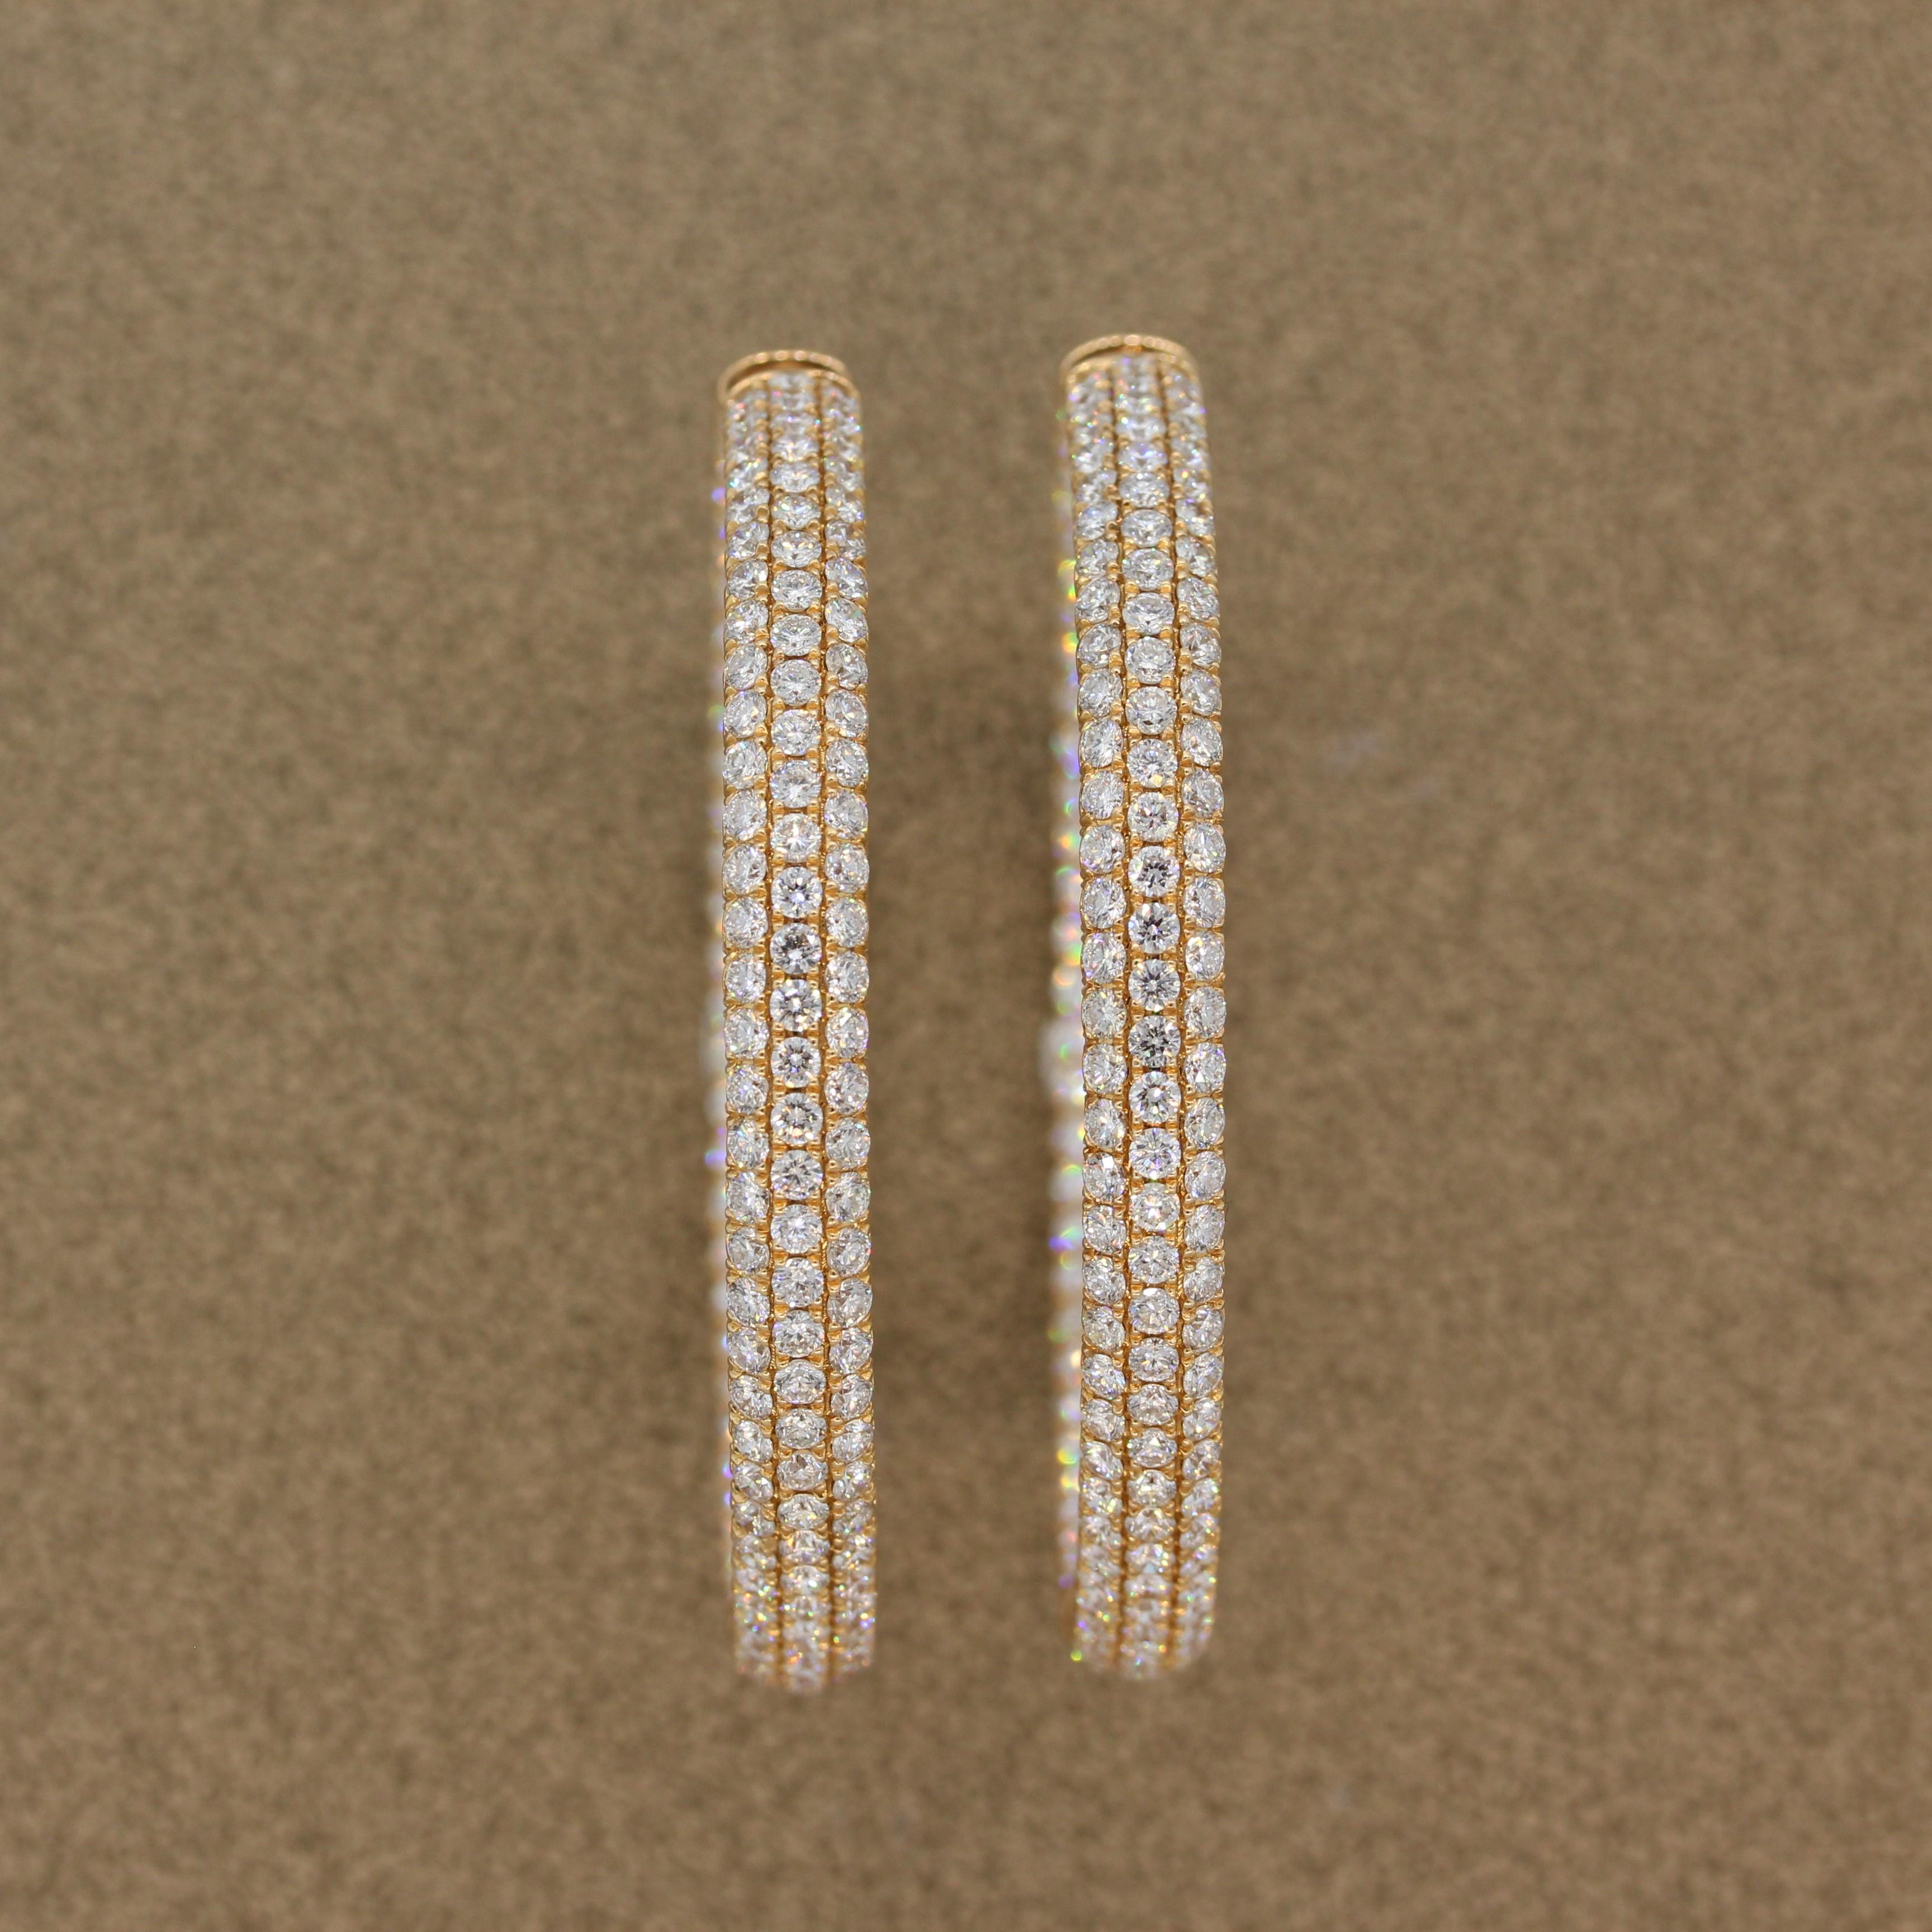 This pair of fun and glamorous inside-out hoop earrings features 14.36 carats of colorless VS quality diamonds. The round cut diamonds are pave set in these grand 18K rose gold earrings that will pair easily to any day and night outfit. A special